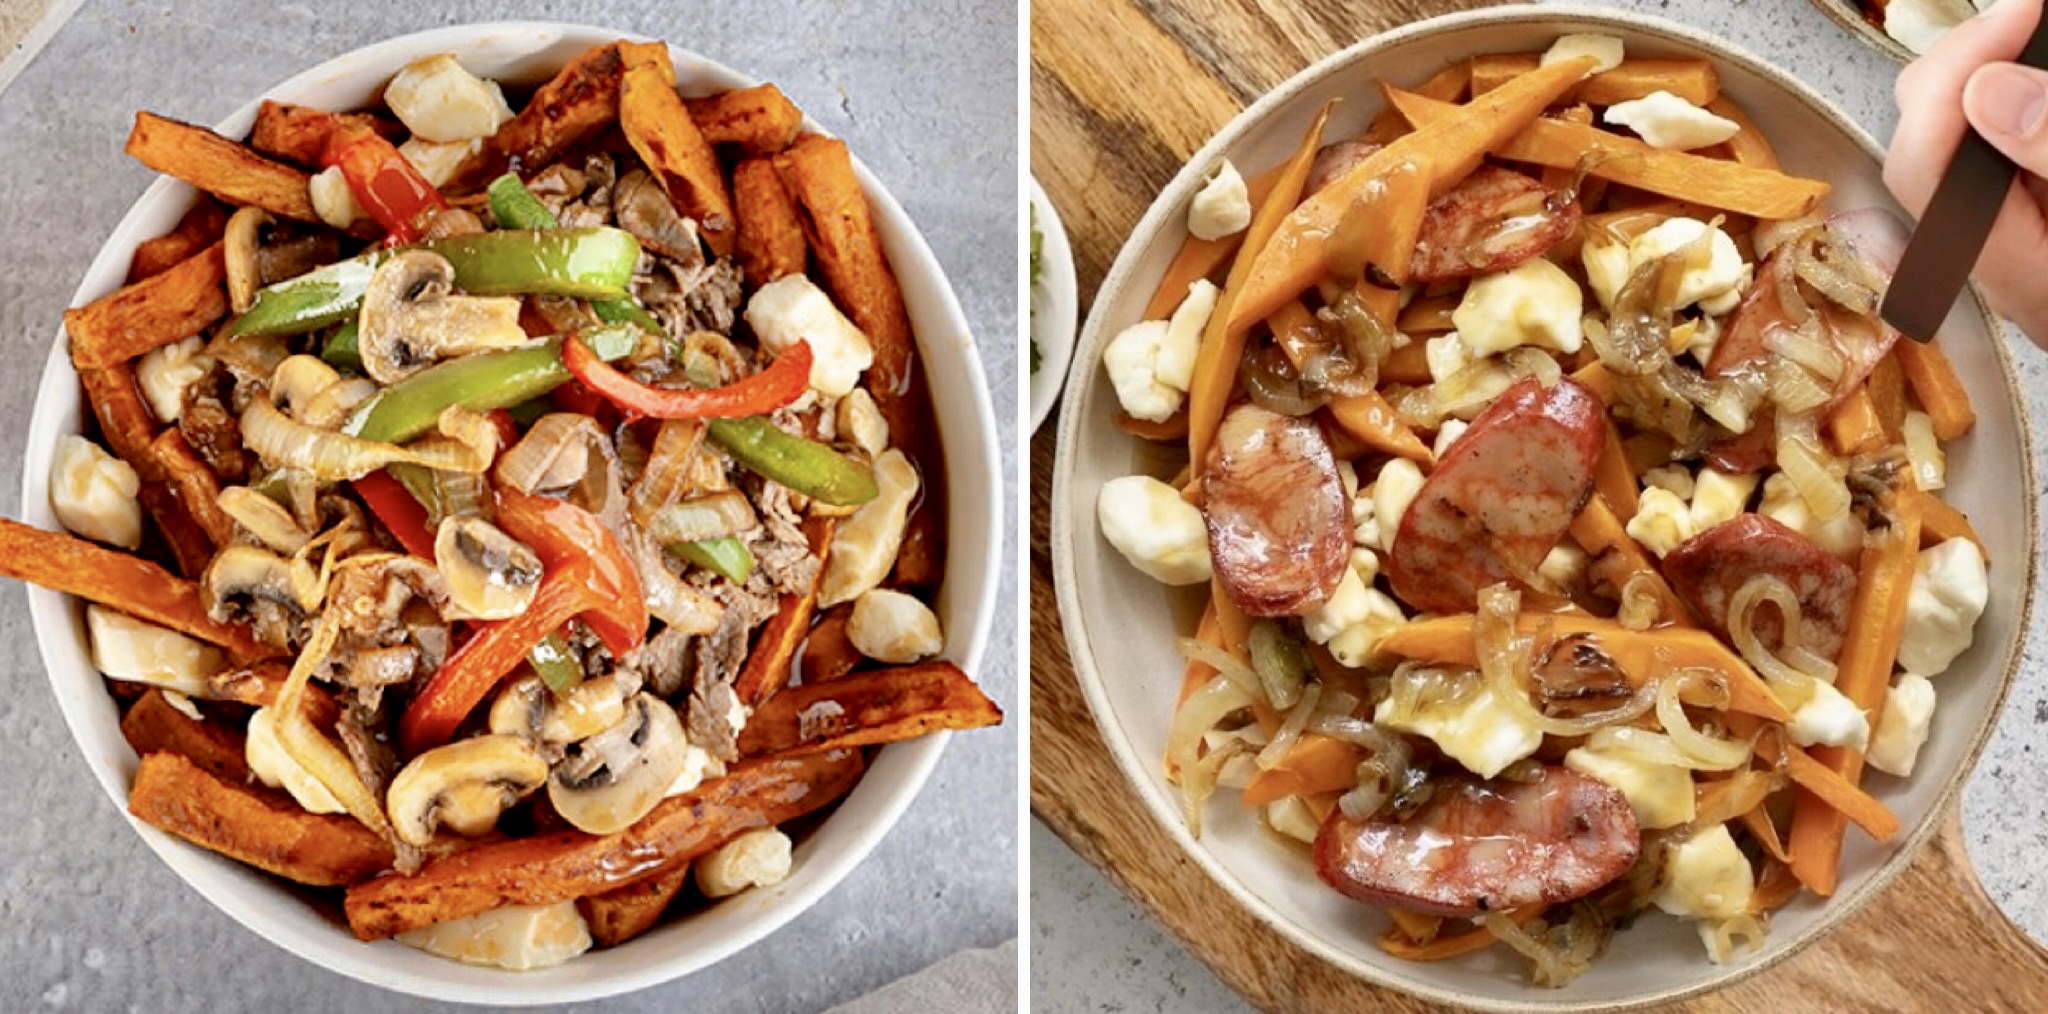 WeCook is delivering some damn fine poutines for Poutine Week